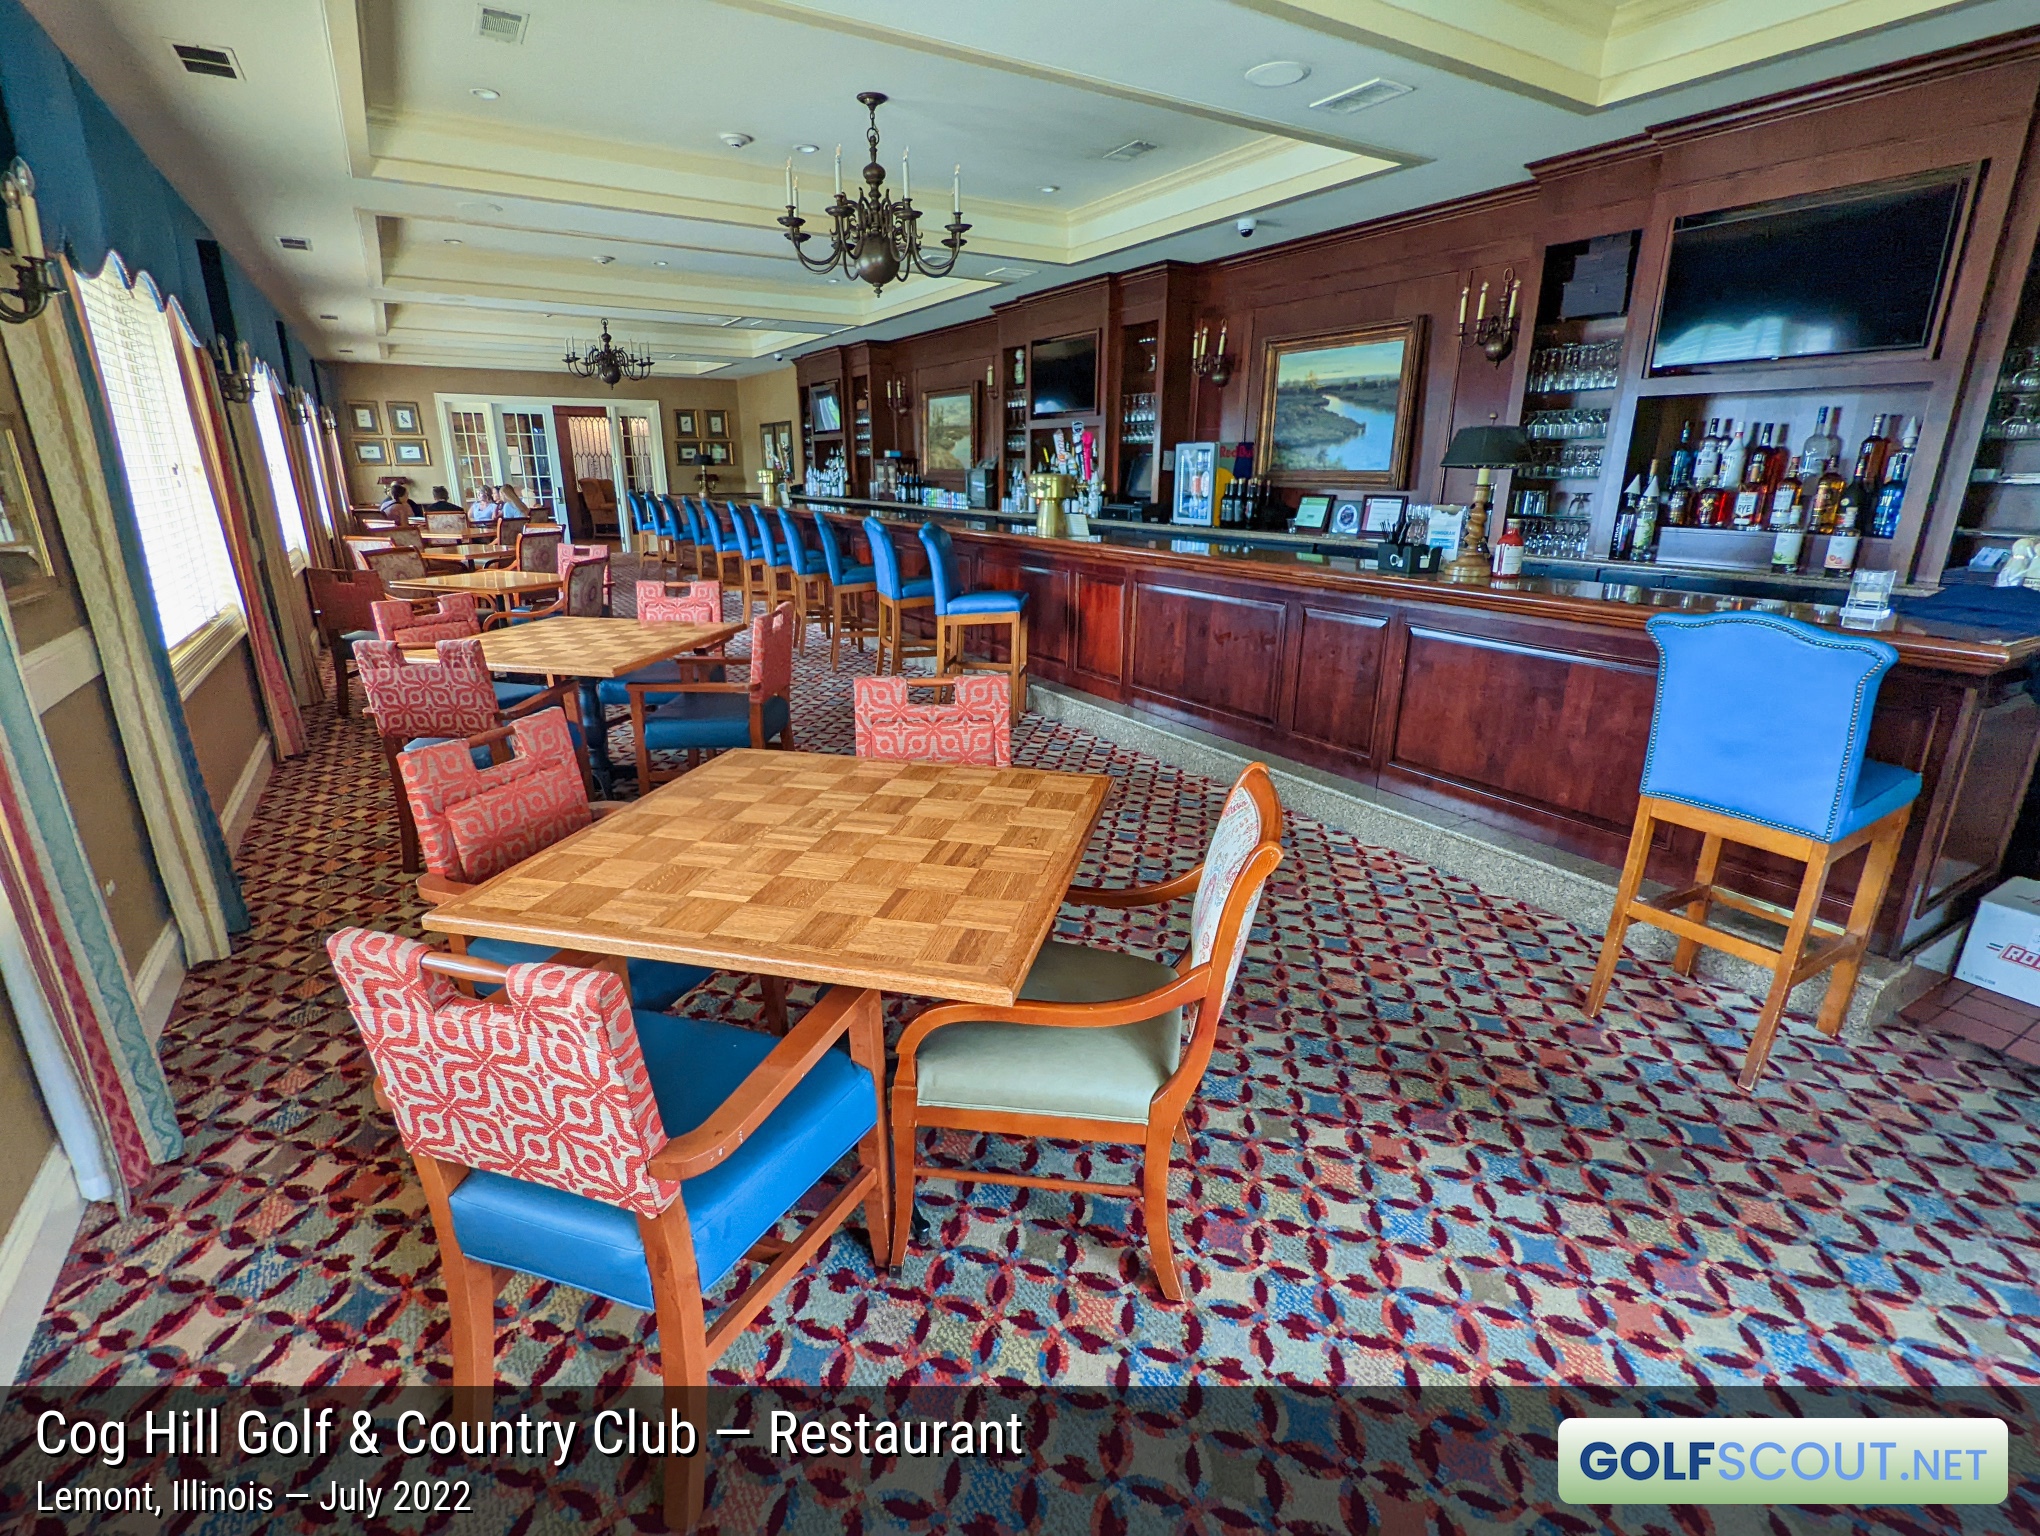 Photo of the restaurant at Cog Hill Course #3 in Lemont, Illinois. Another angle of the bar.